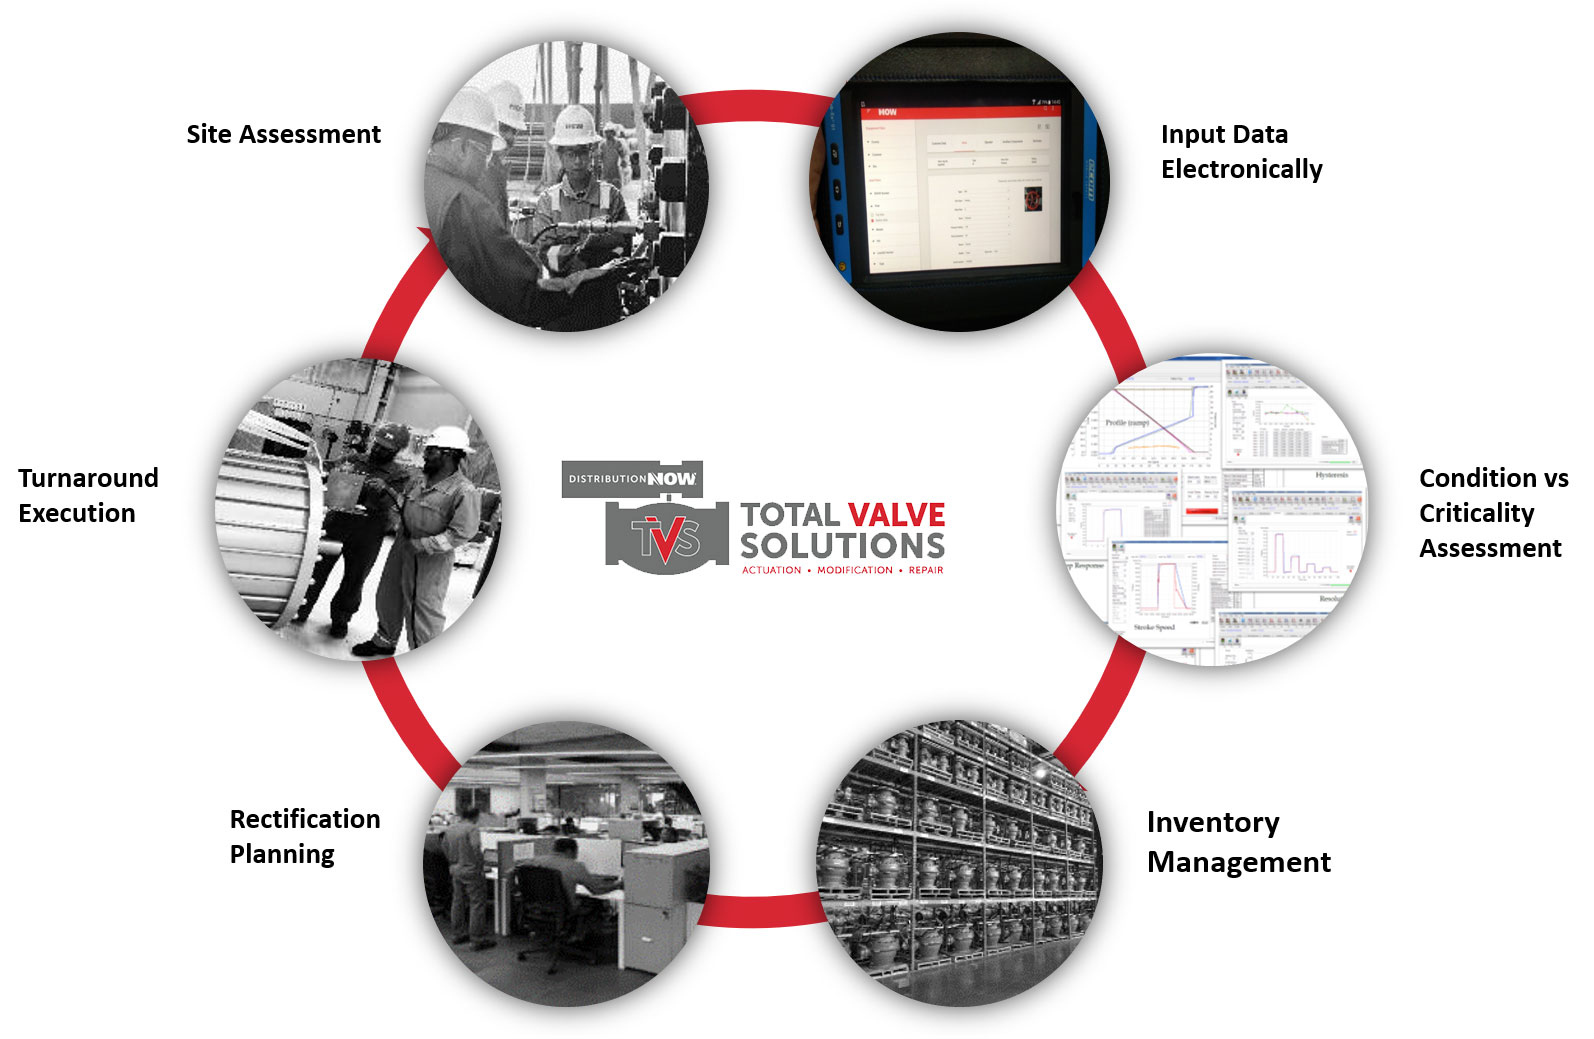 We help customers manage their valve assets across the total life cycle